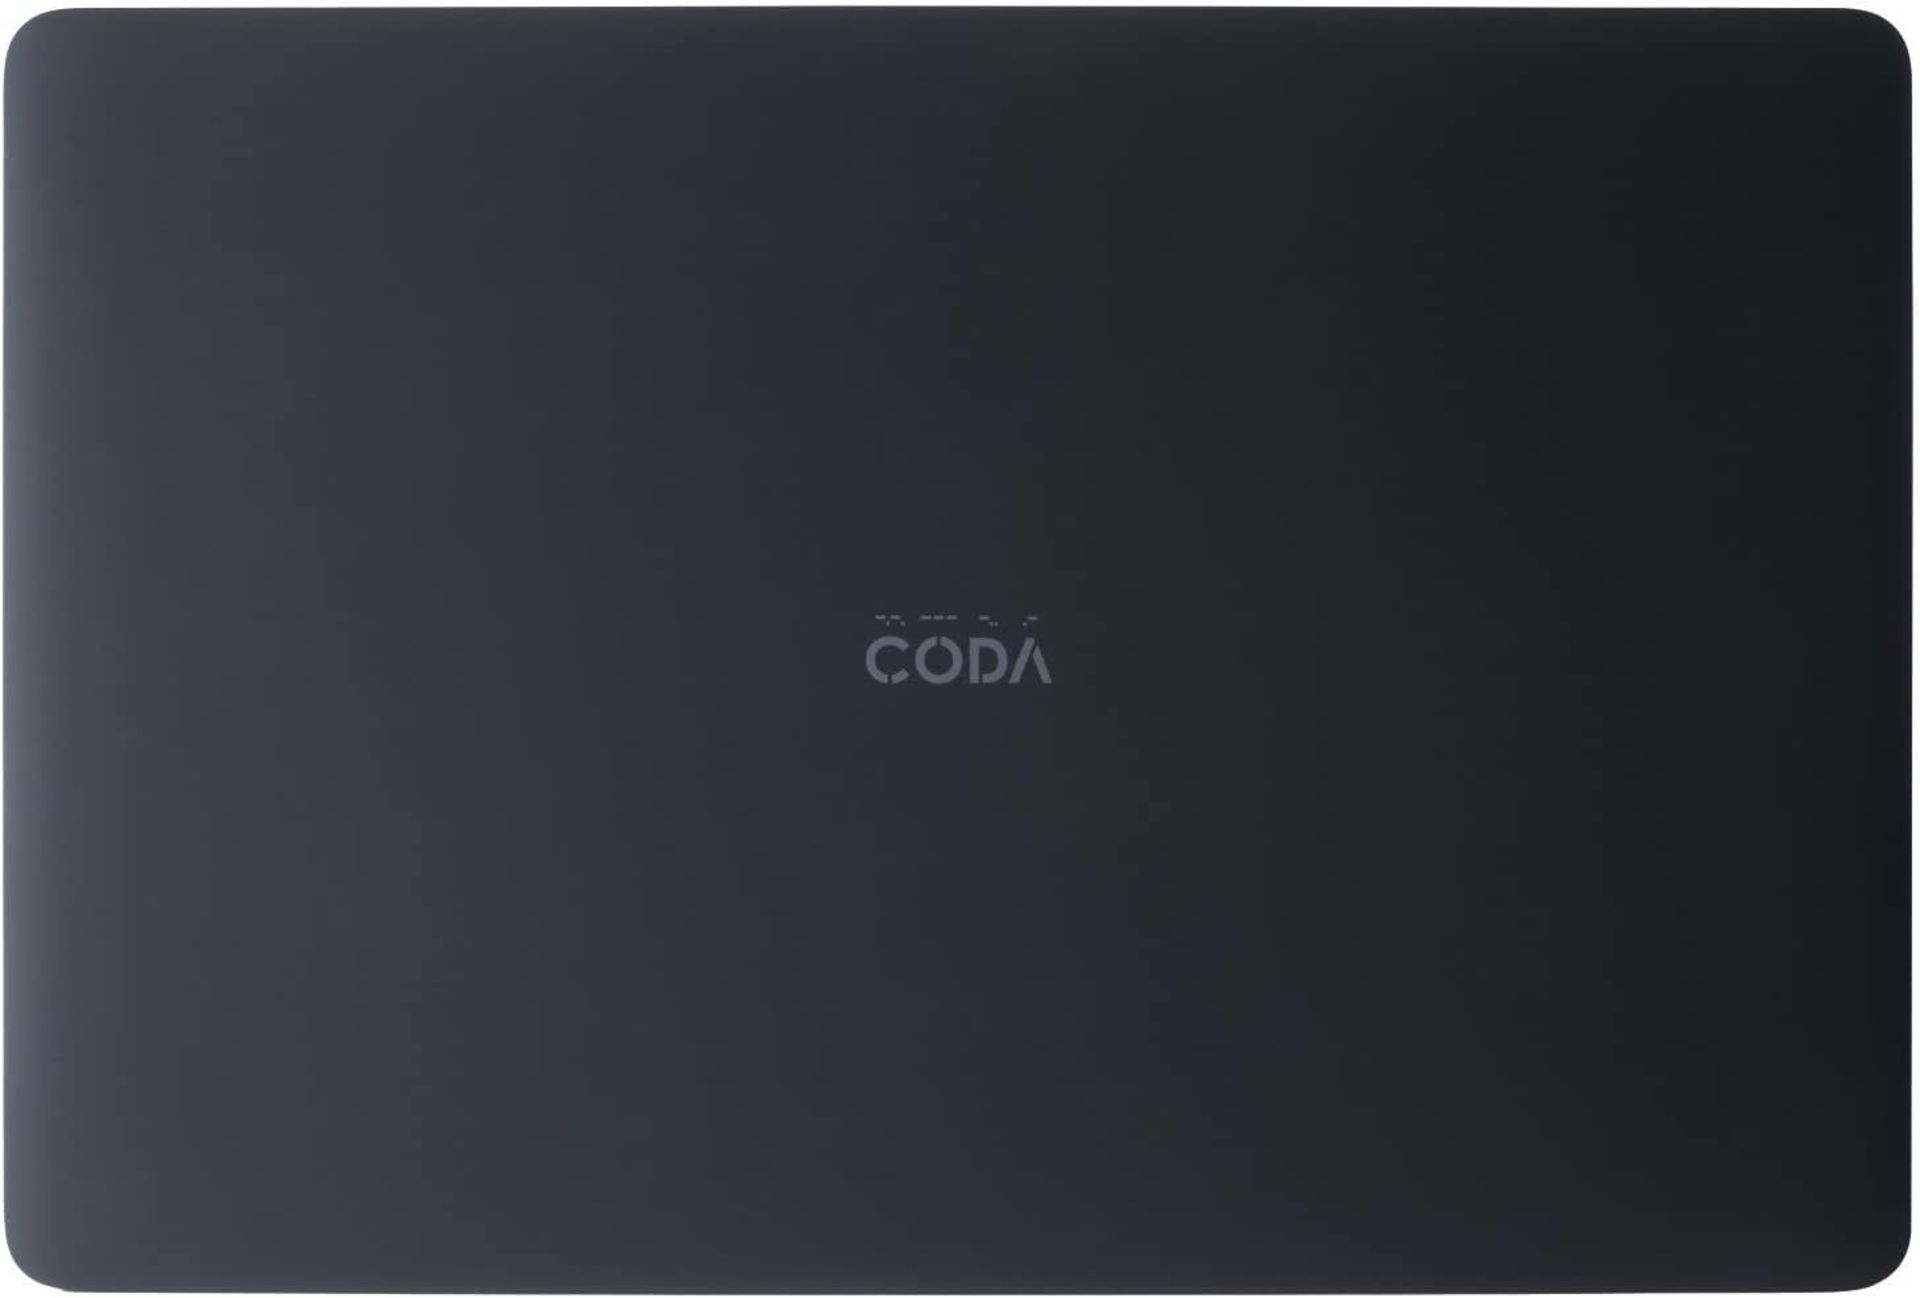 NEW & BOXED CODA 1.4 CODA043 14 Inch Laptop. RRP £199.99. (SR). Operating system Windows 10S, SSD - Image 7 of 7